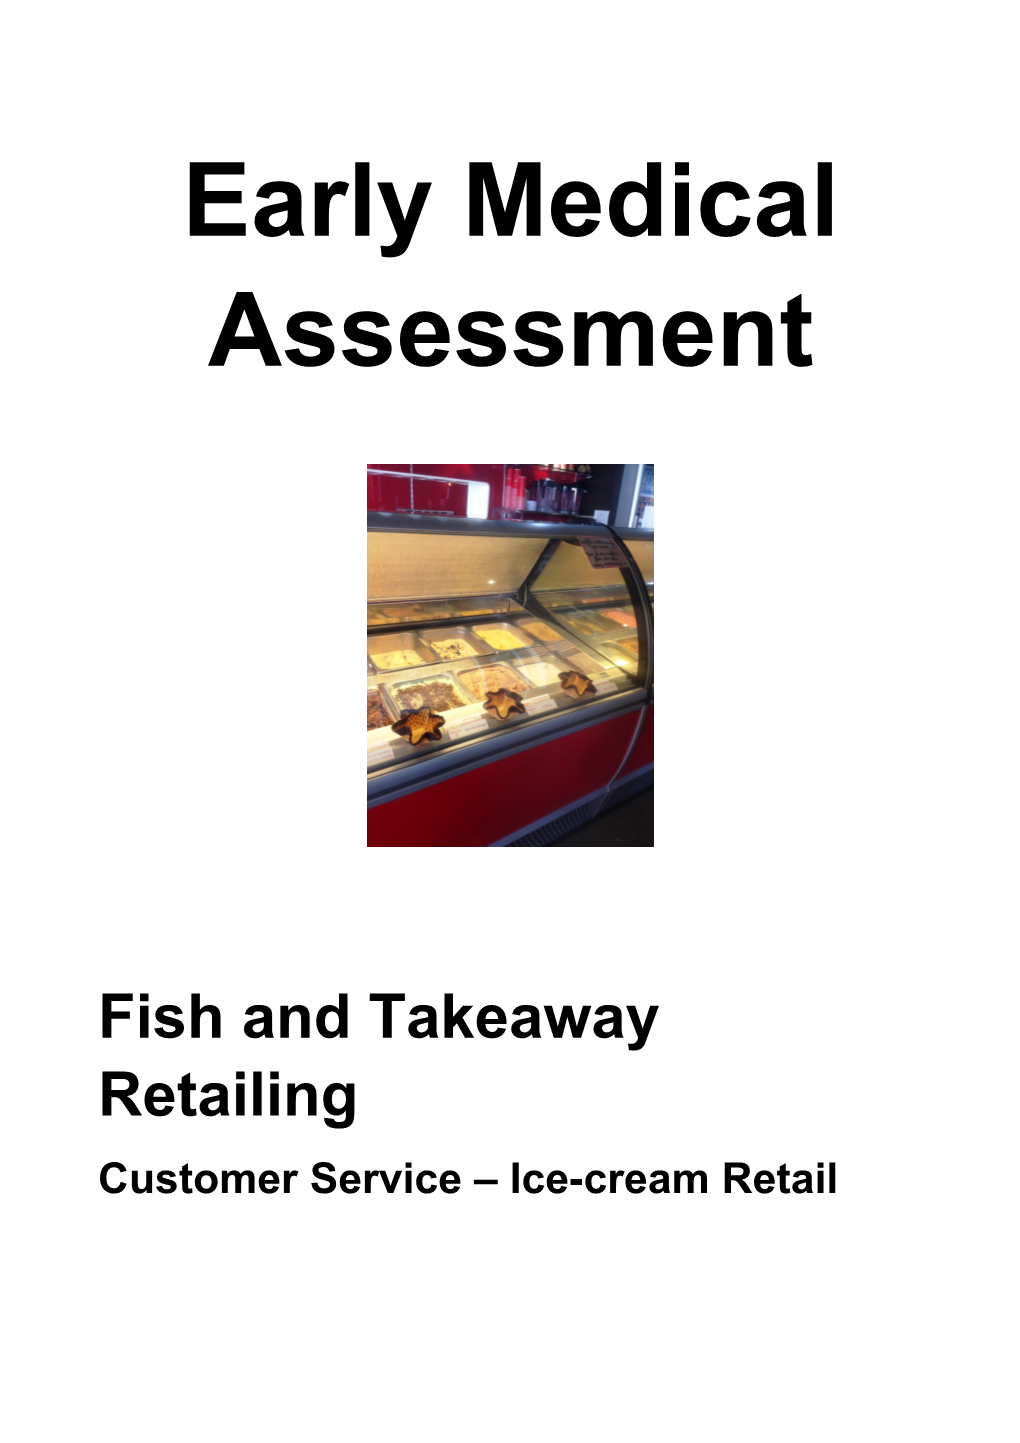 Fish and Takeaway Retailing - Customer Service 3